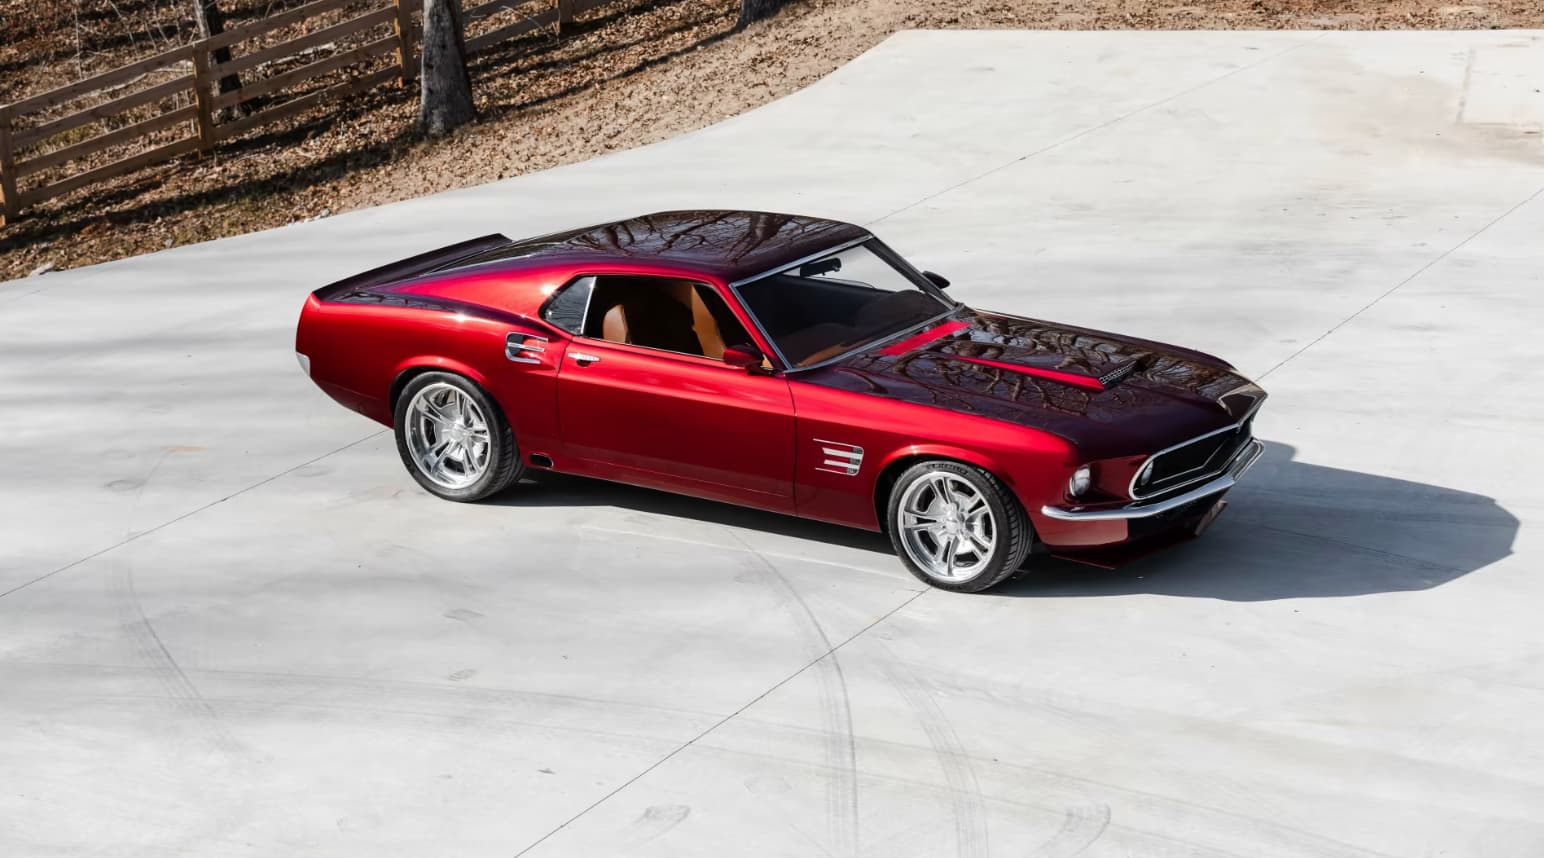 1969 Ford Mustang Custom Fastback: The Journey of a Ground-Up 6-Year Build